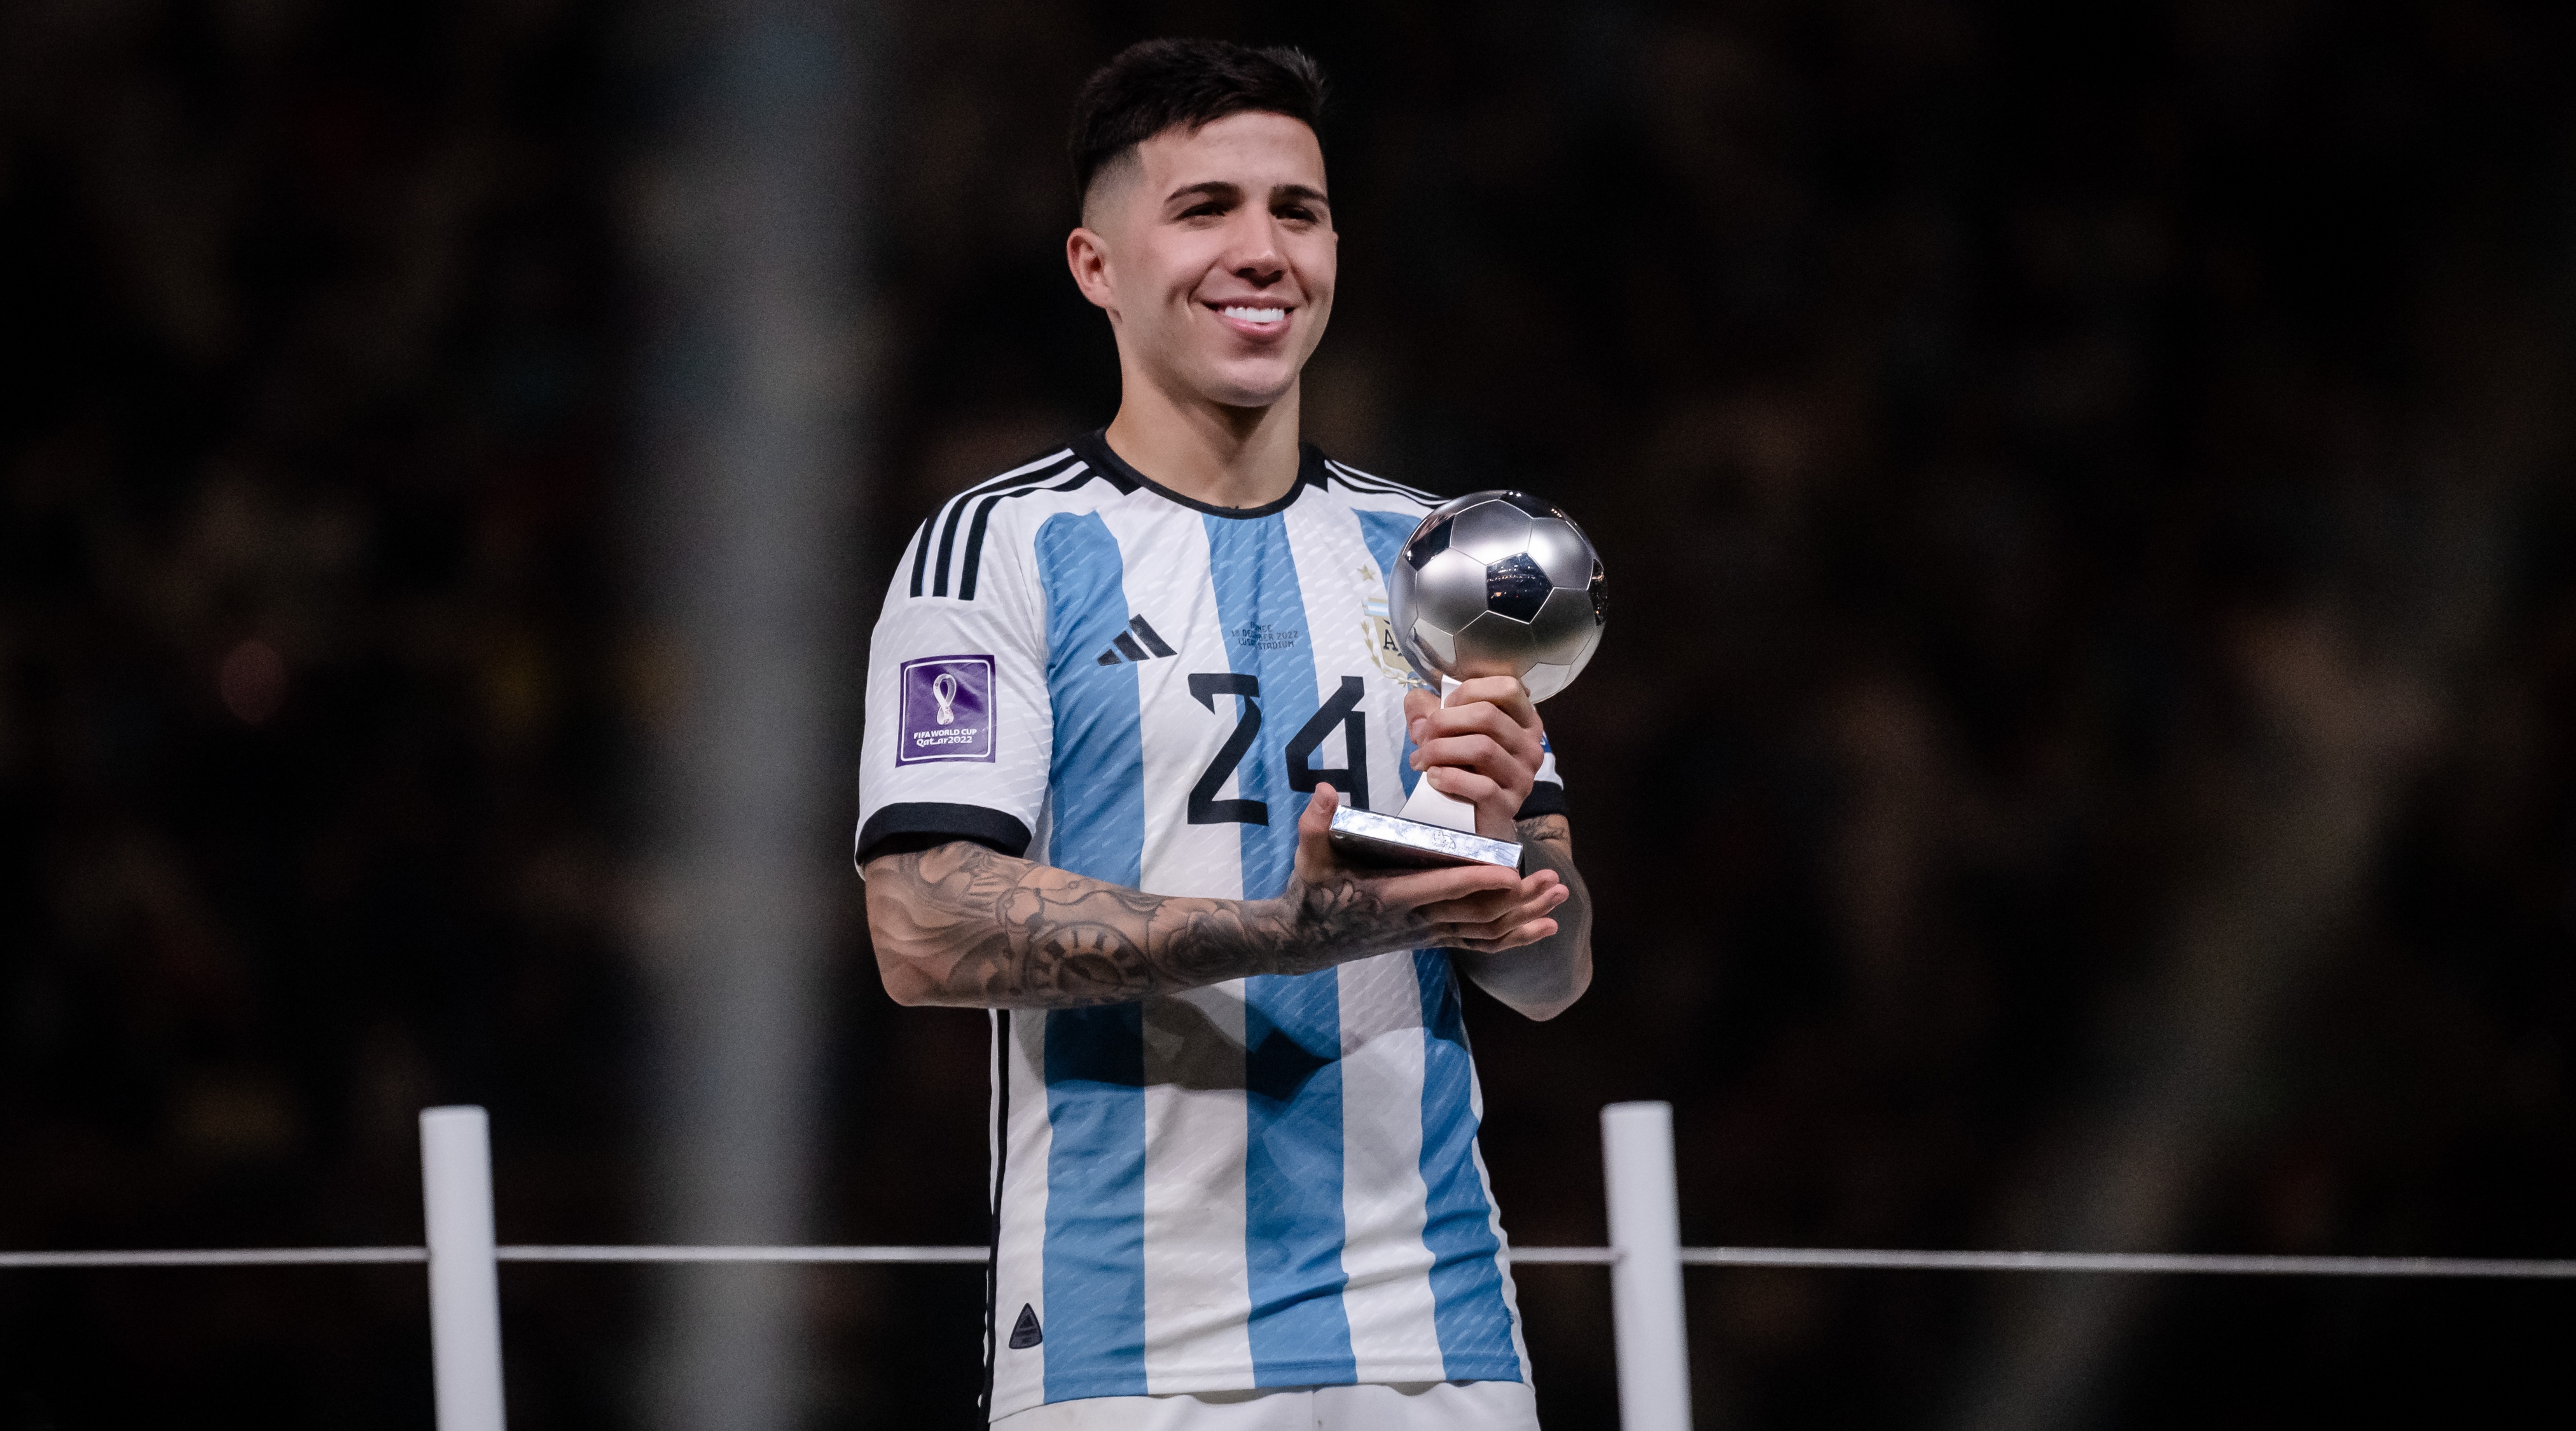 Enzo Fernandez of Argentina holds the trophy for Best Young Player after Argentina beat France in the final of the FIFA World Cup 2022 on 18 December, 2022 at the Lusail Stadium in Lusail, Qatar.